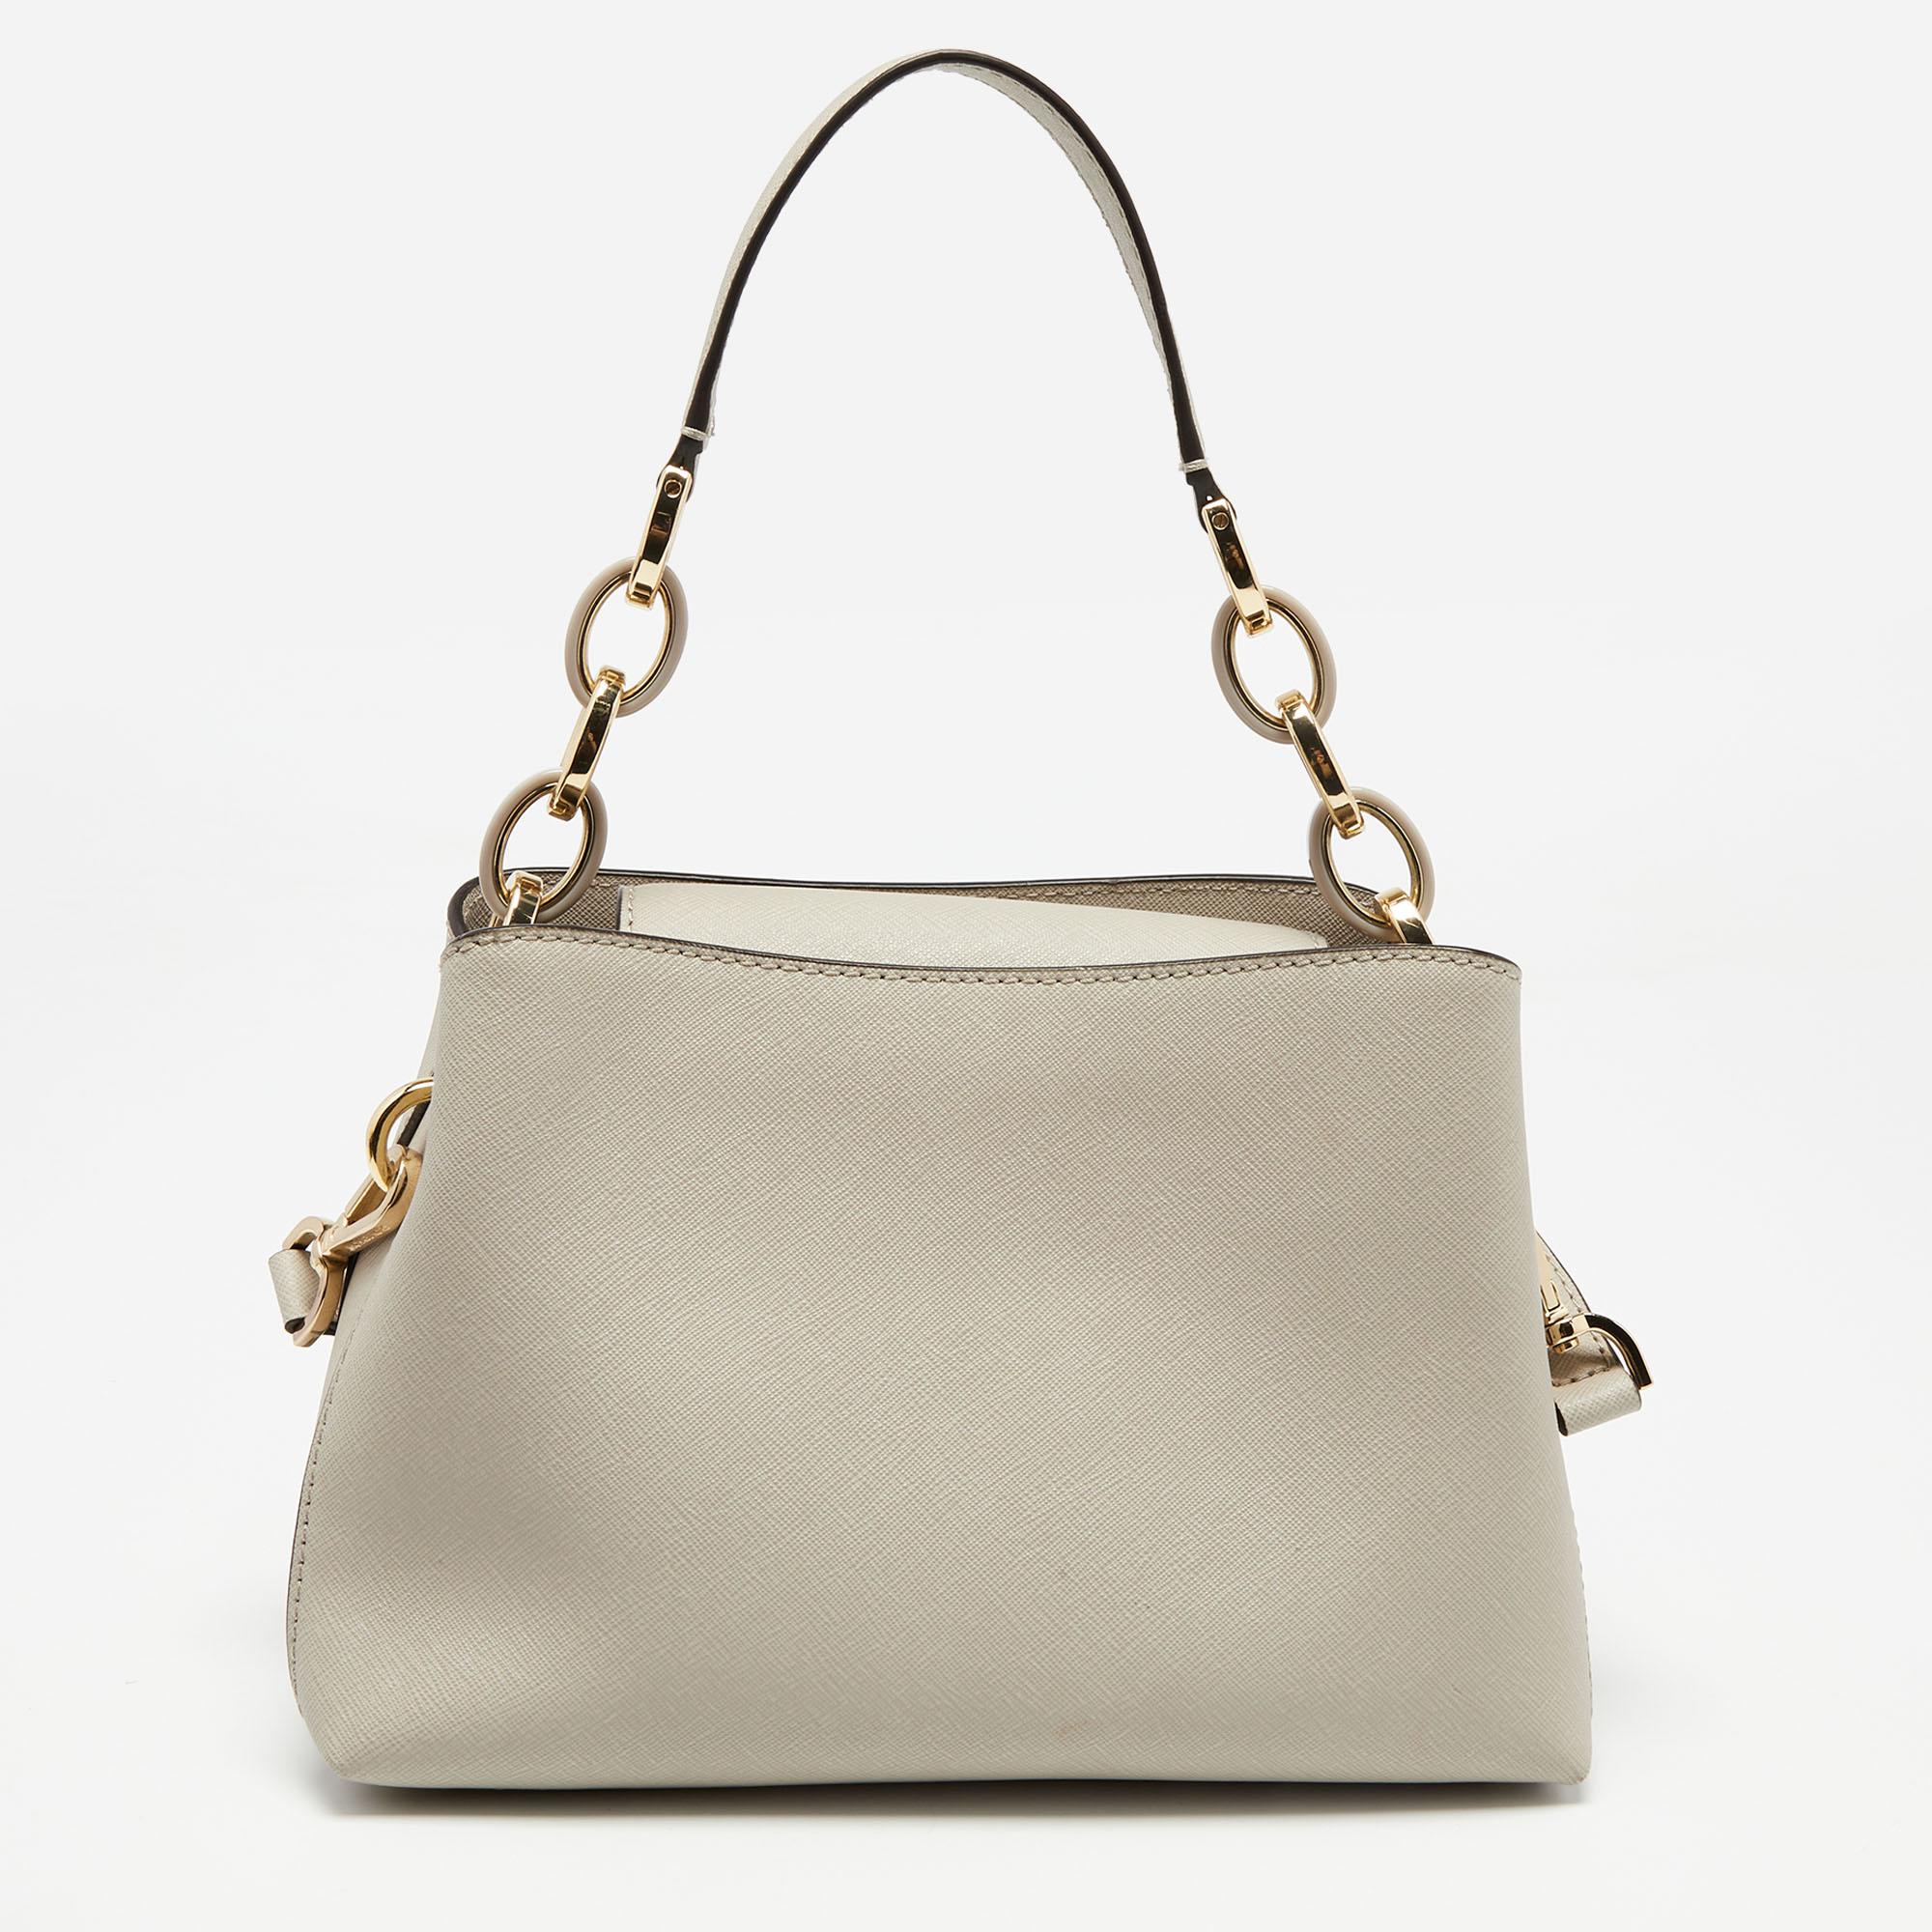 This MICHAEL Michael Kors bag proves minimalism can be classy. Made from leather, it exhibits a brand signature on the front, a shoulder strap, and a single handle. The fabric-lined interior of the bag is divided into two compartments by a zipper